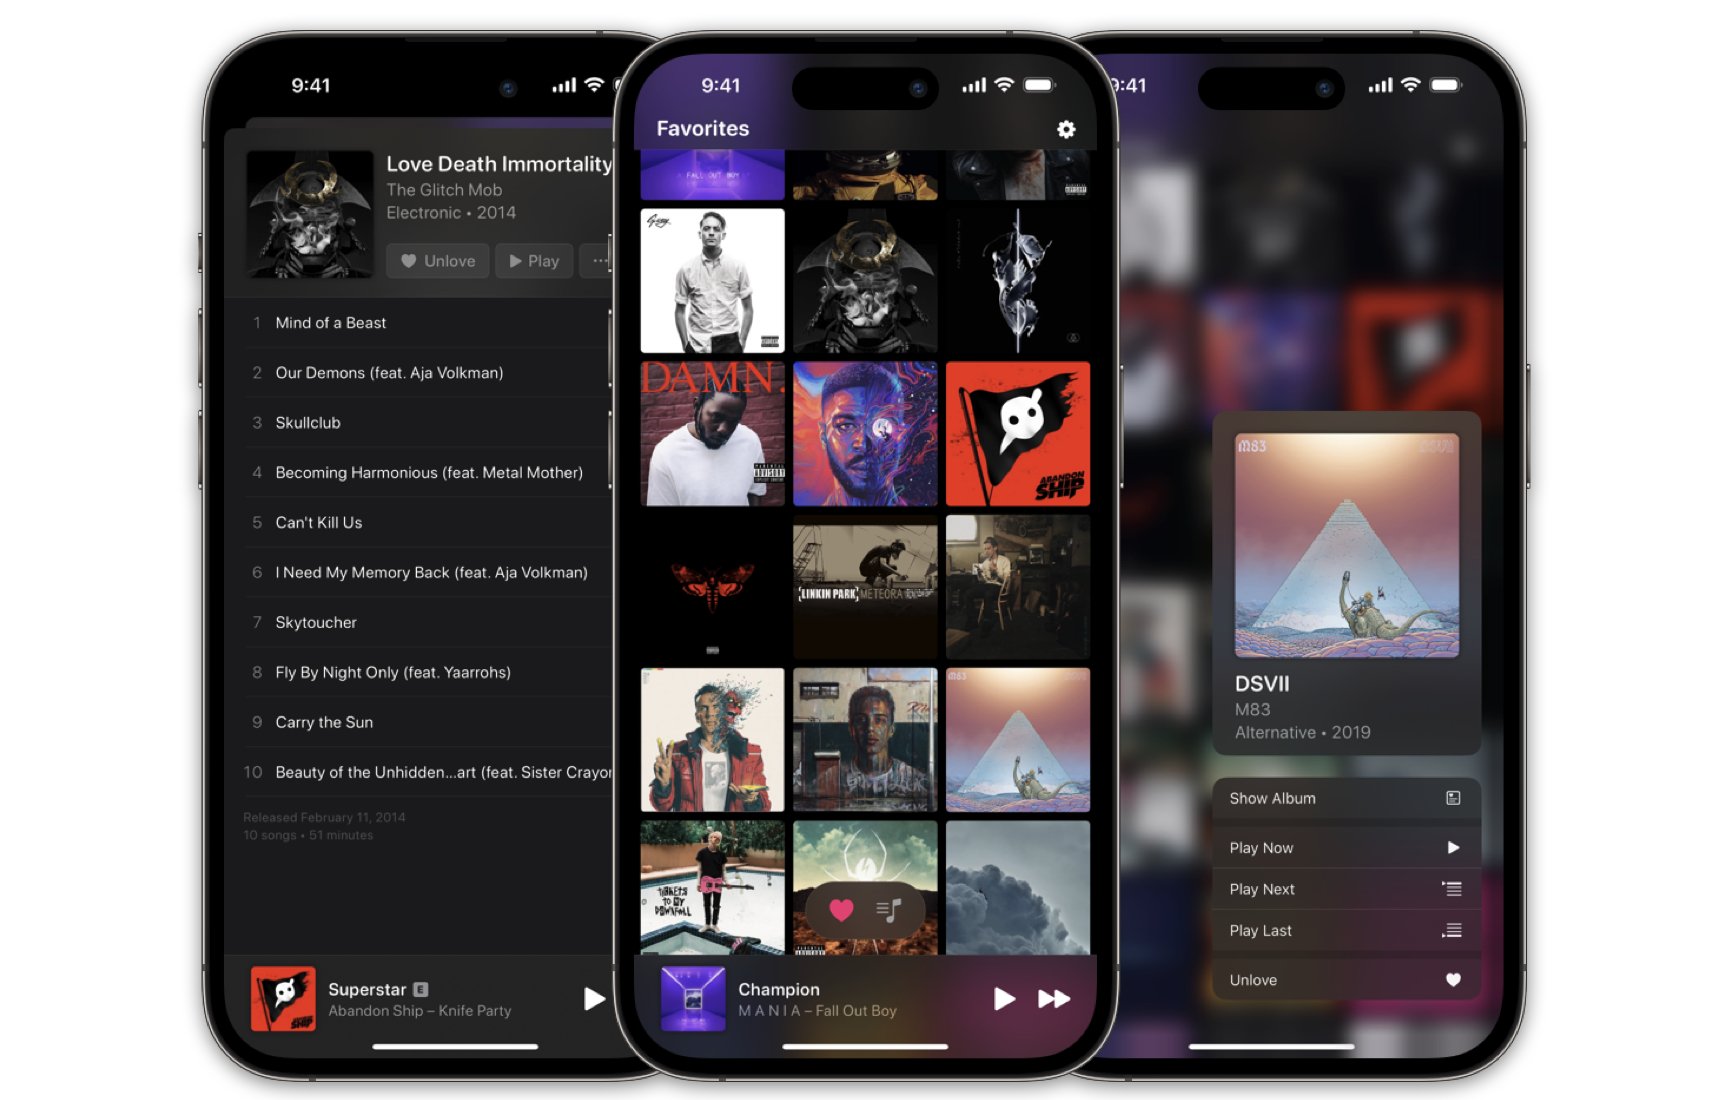 Take a New Look At Your Apple Music Collection With Albums